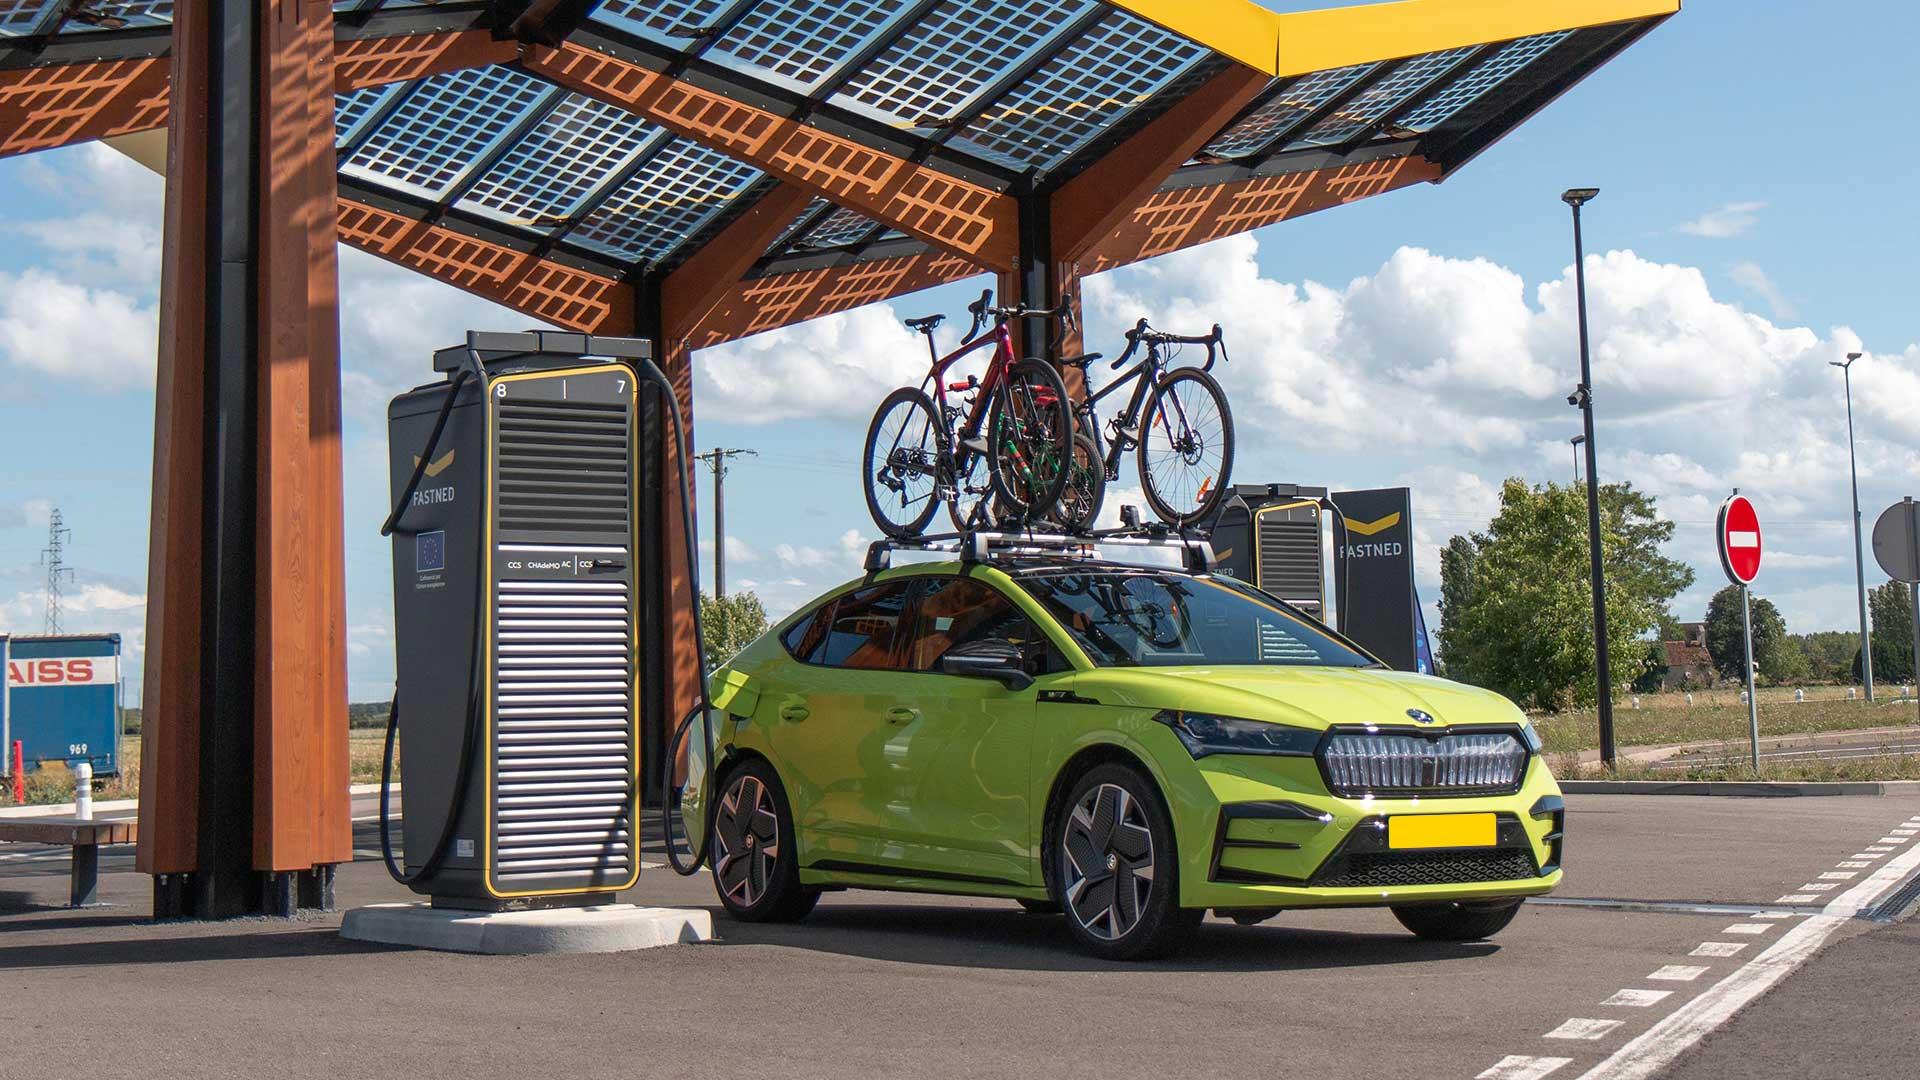 Skoda Enyaq at the charging station with bicycles on the roof (fastned) along the highway